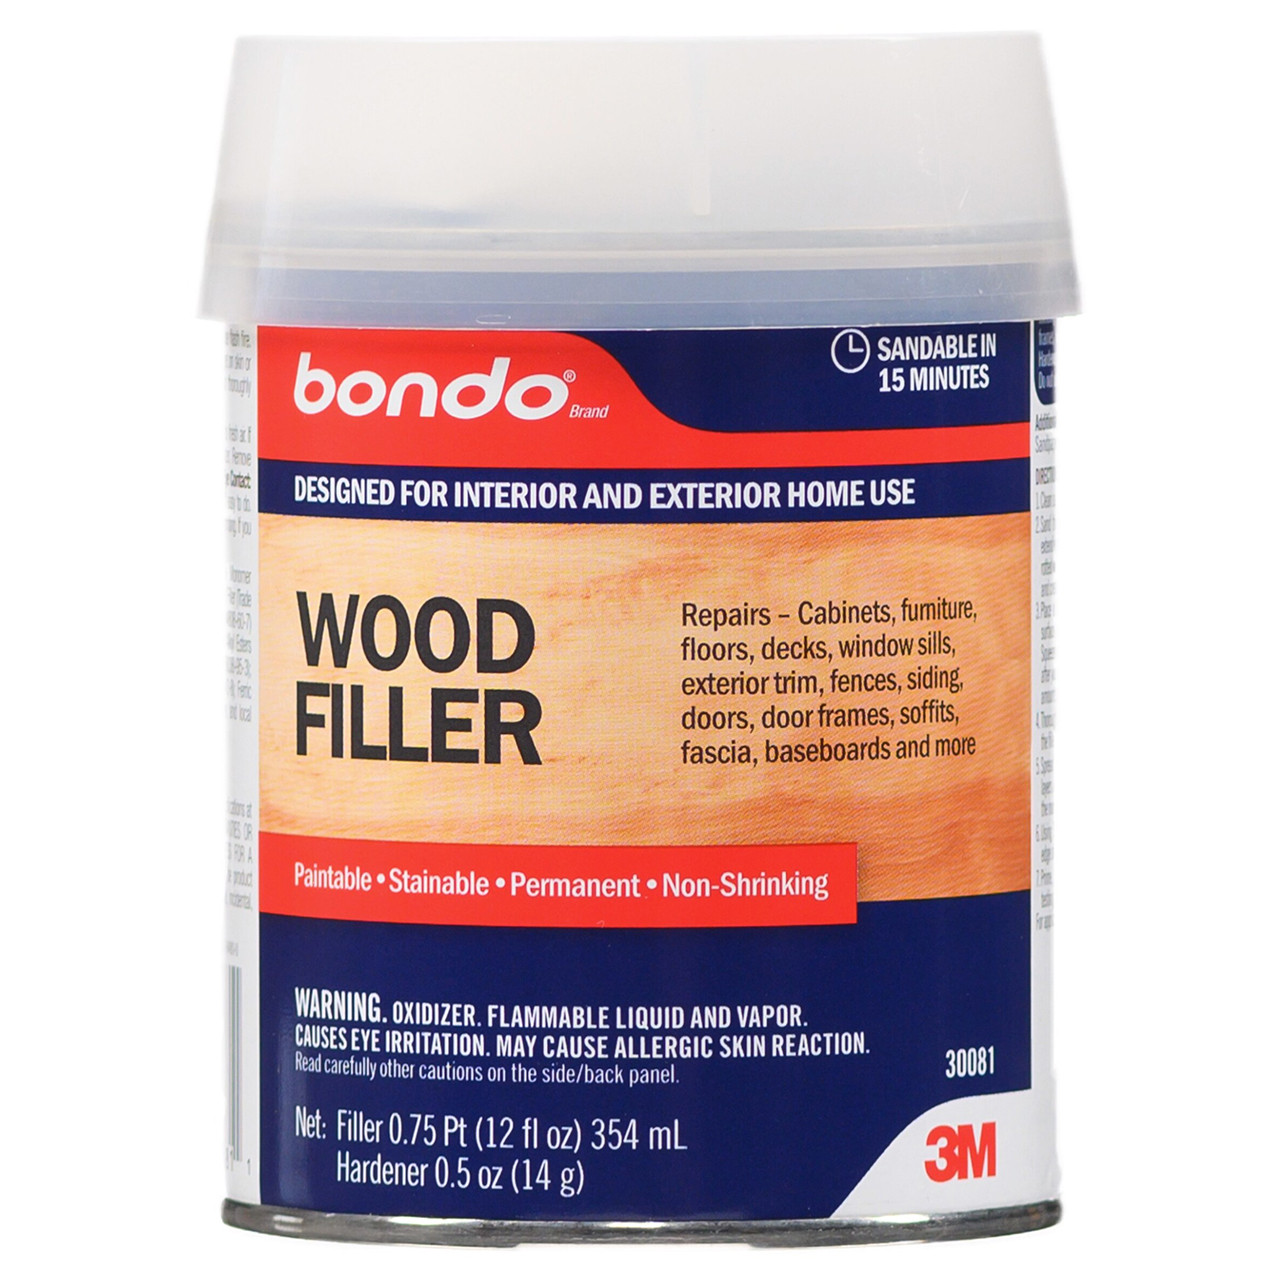 How To Repair A Door Frame With Wood Filler: Quick Fixes!